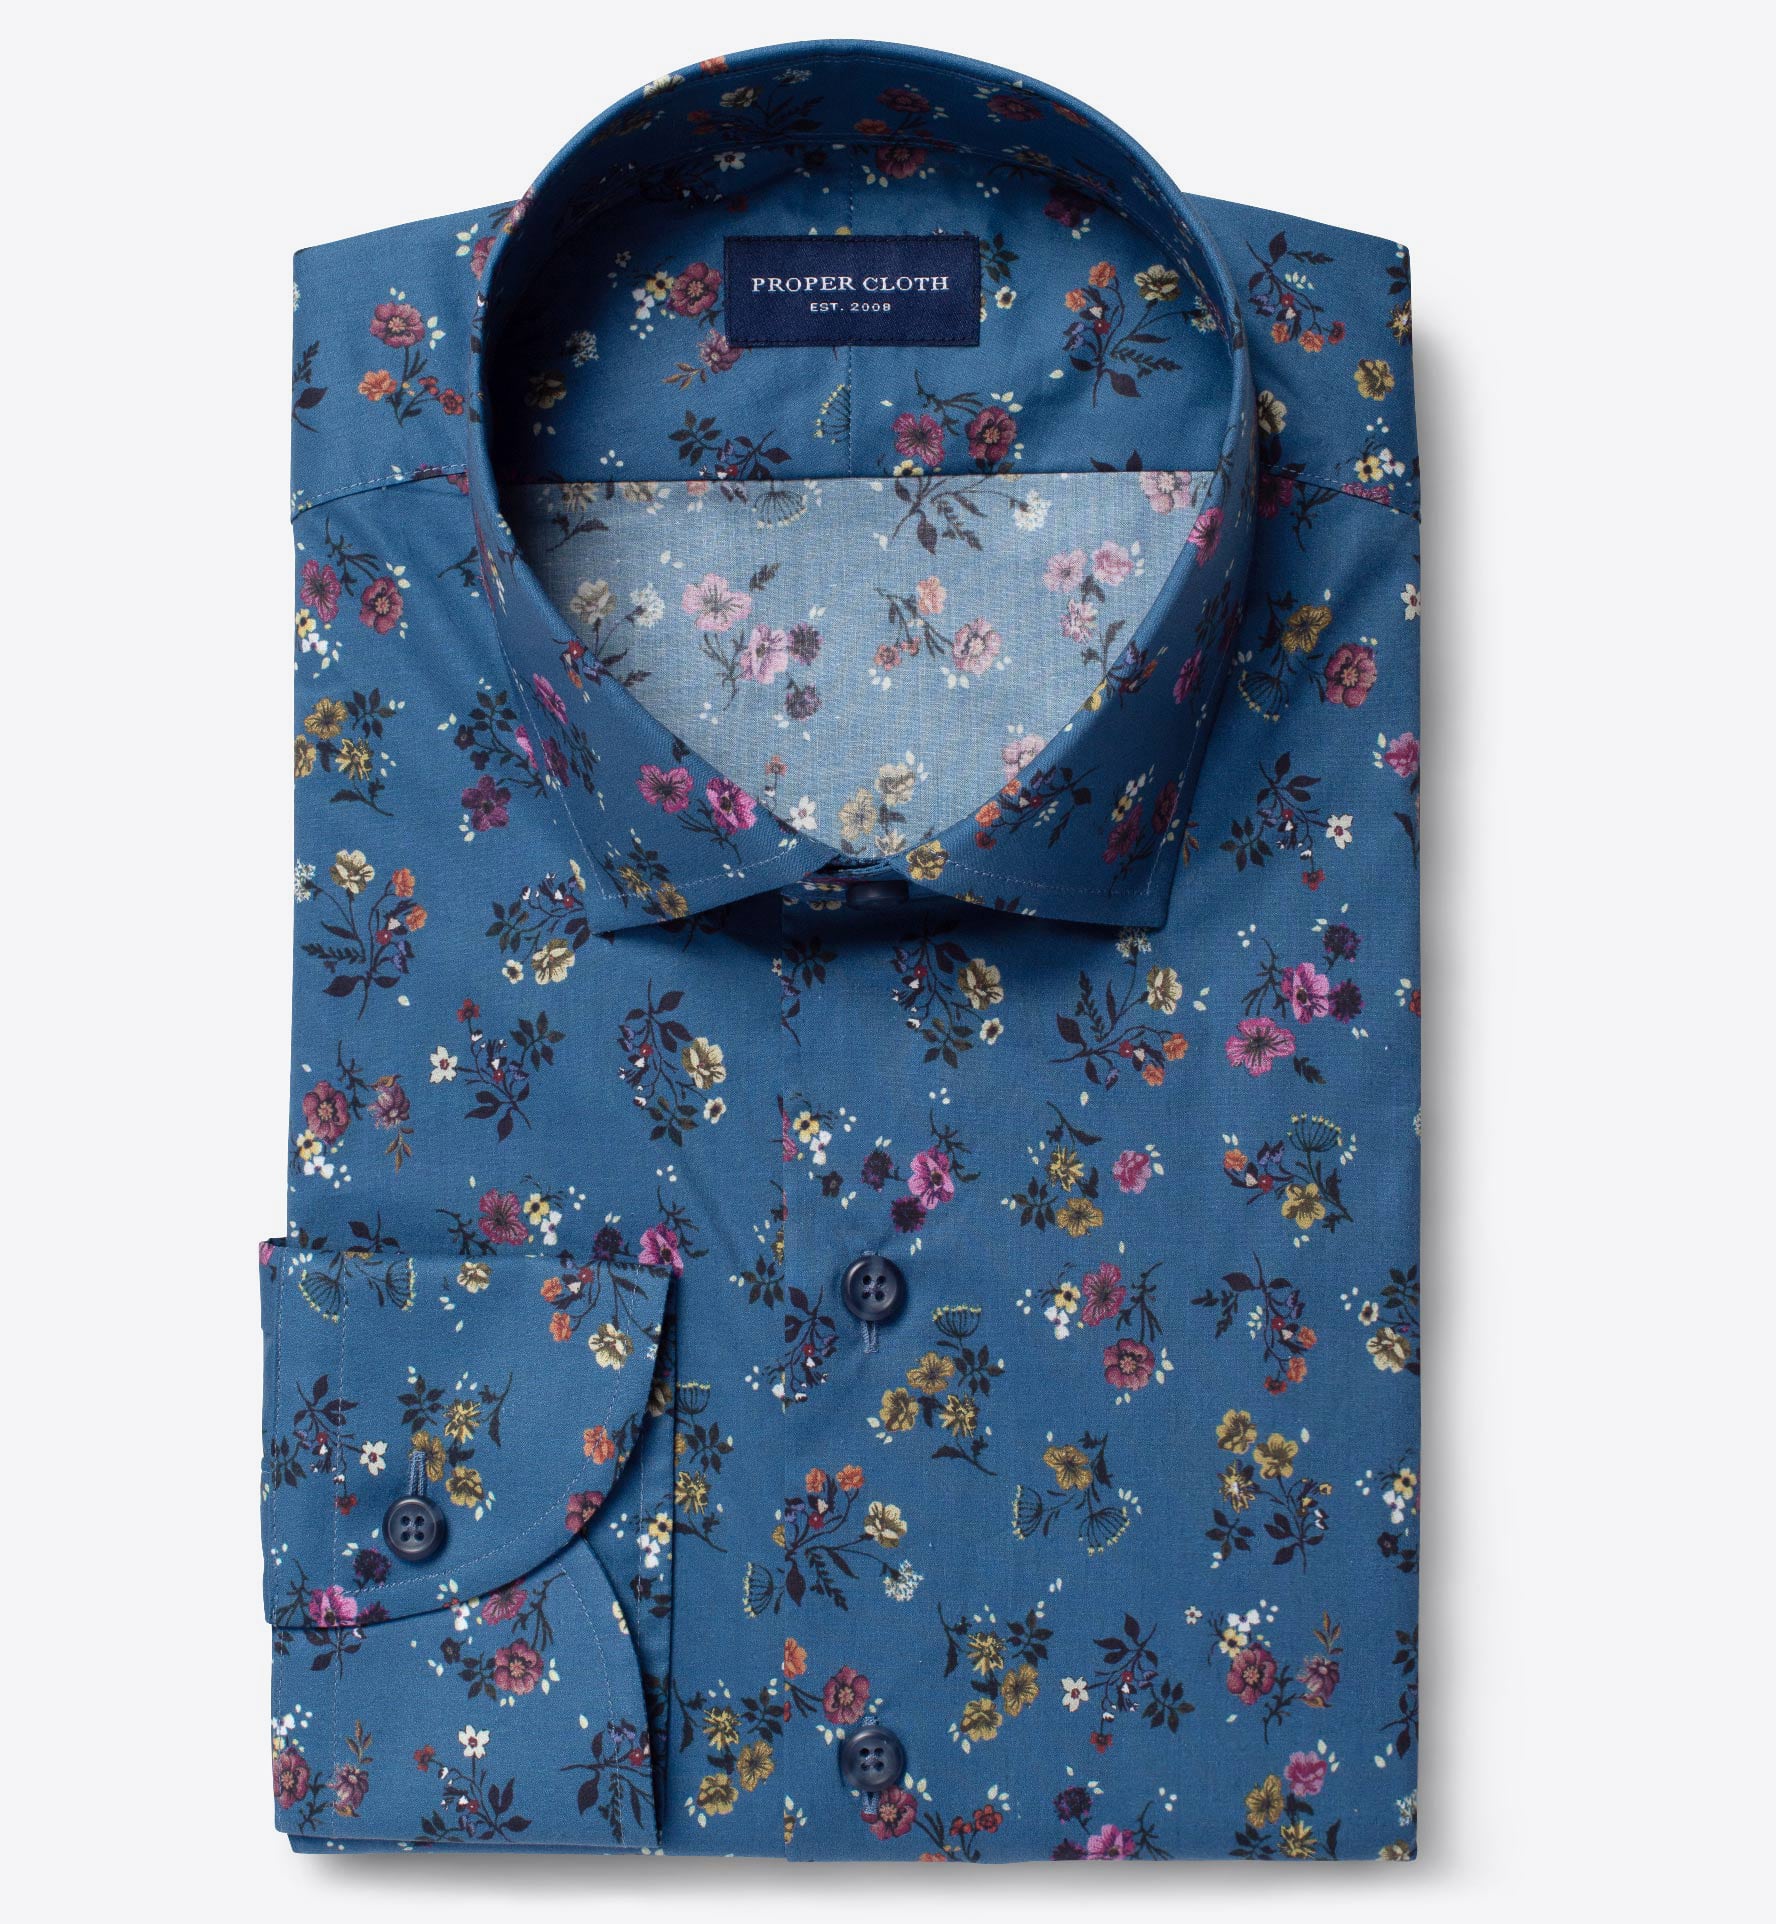 Albini Steel Blue Floral Print Tailor Made Shirt by Proper Cloth